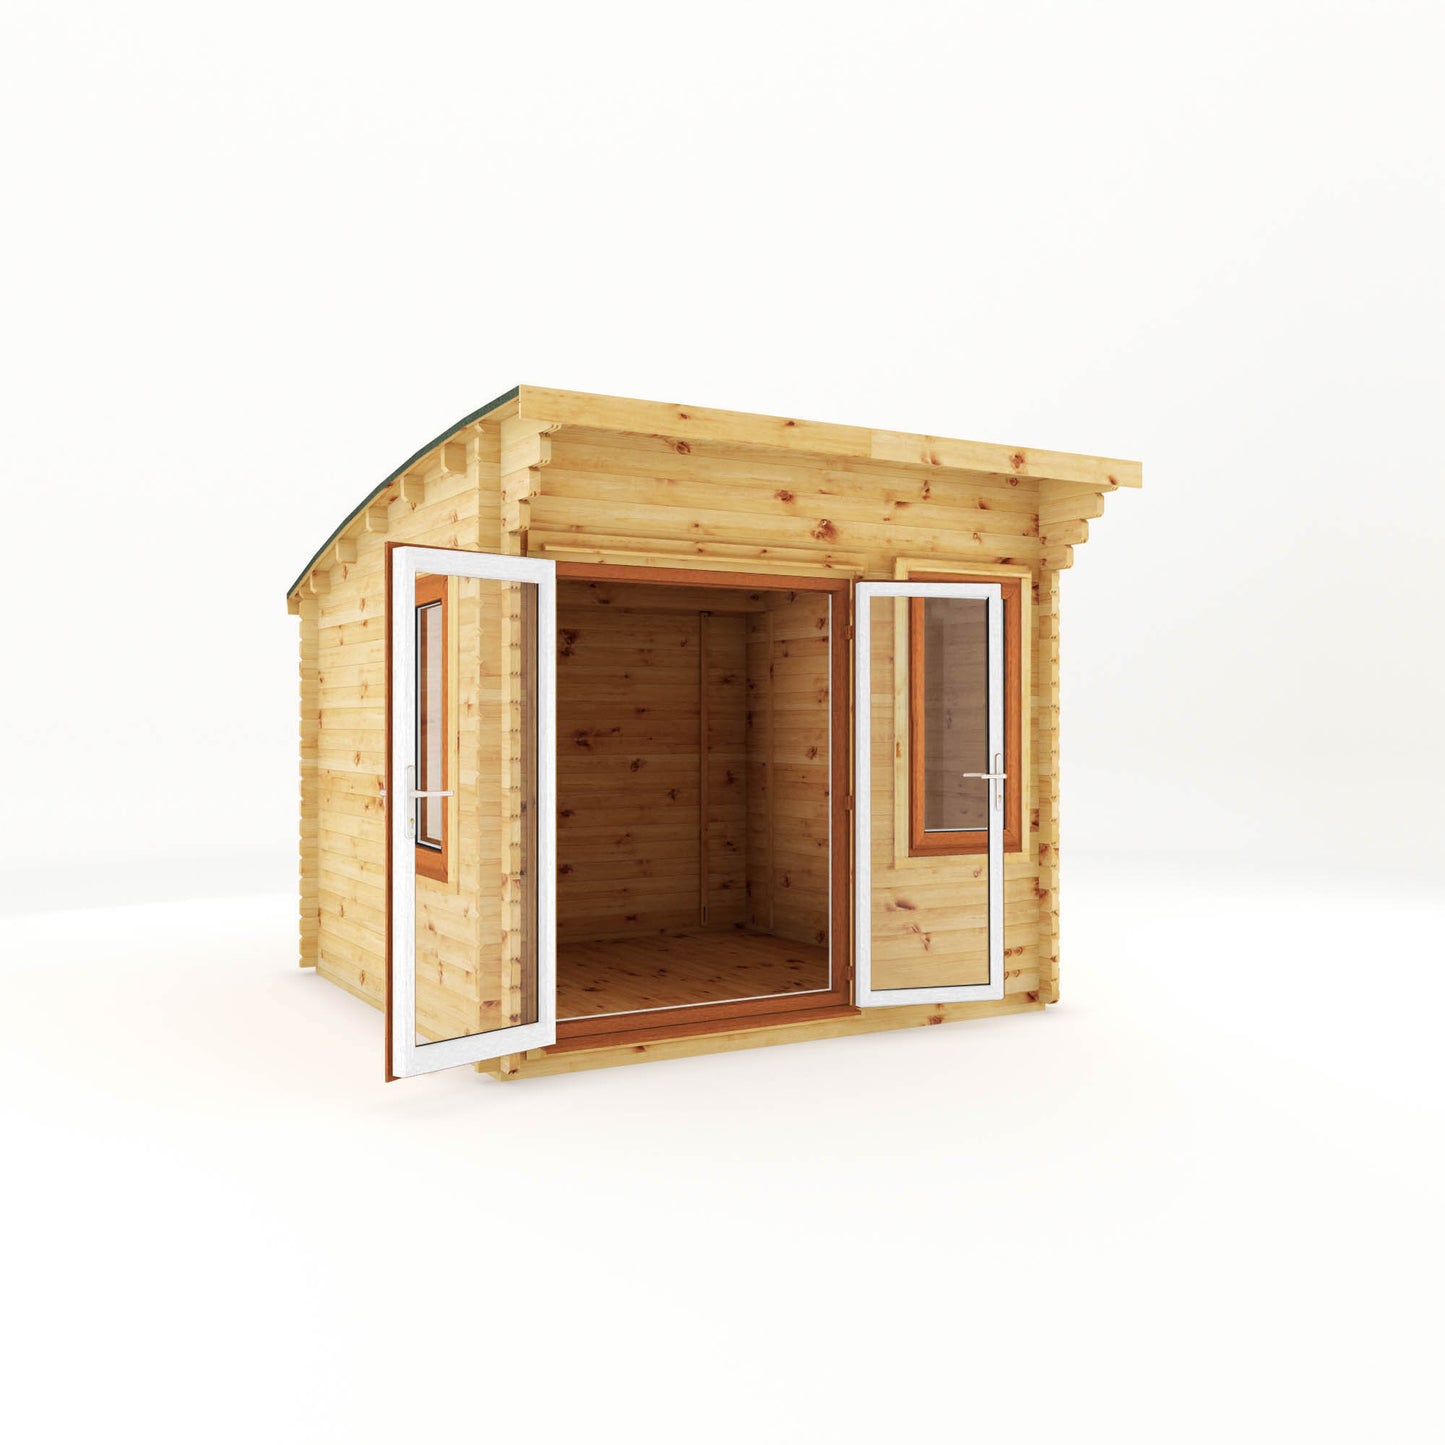 The 3m x 3m Tawny Curved Roof Log Cabin with Oak UPVC